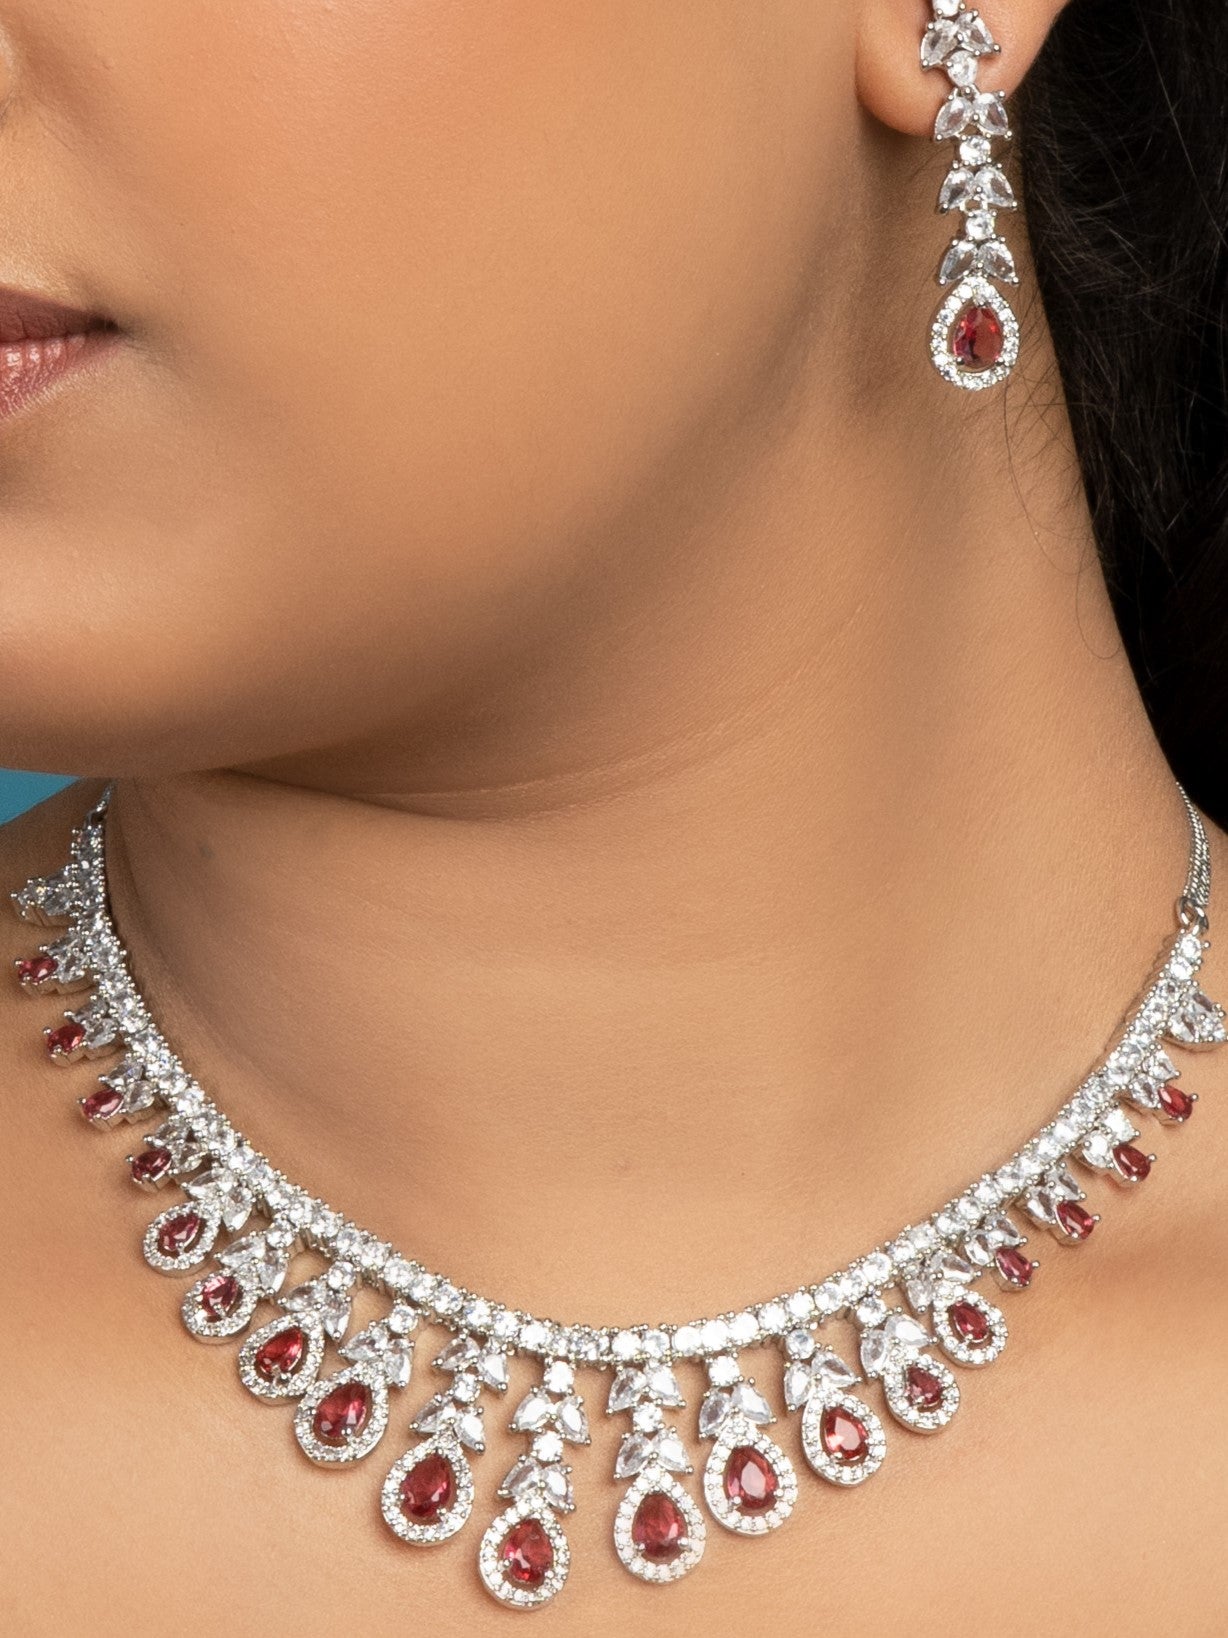 Nayaab American Diamond Choker with Earrings (Necklace and Earrings Set) - QUEENS JEWELS